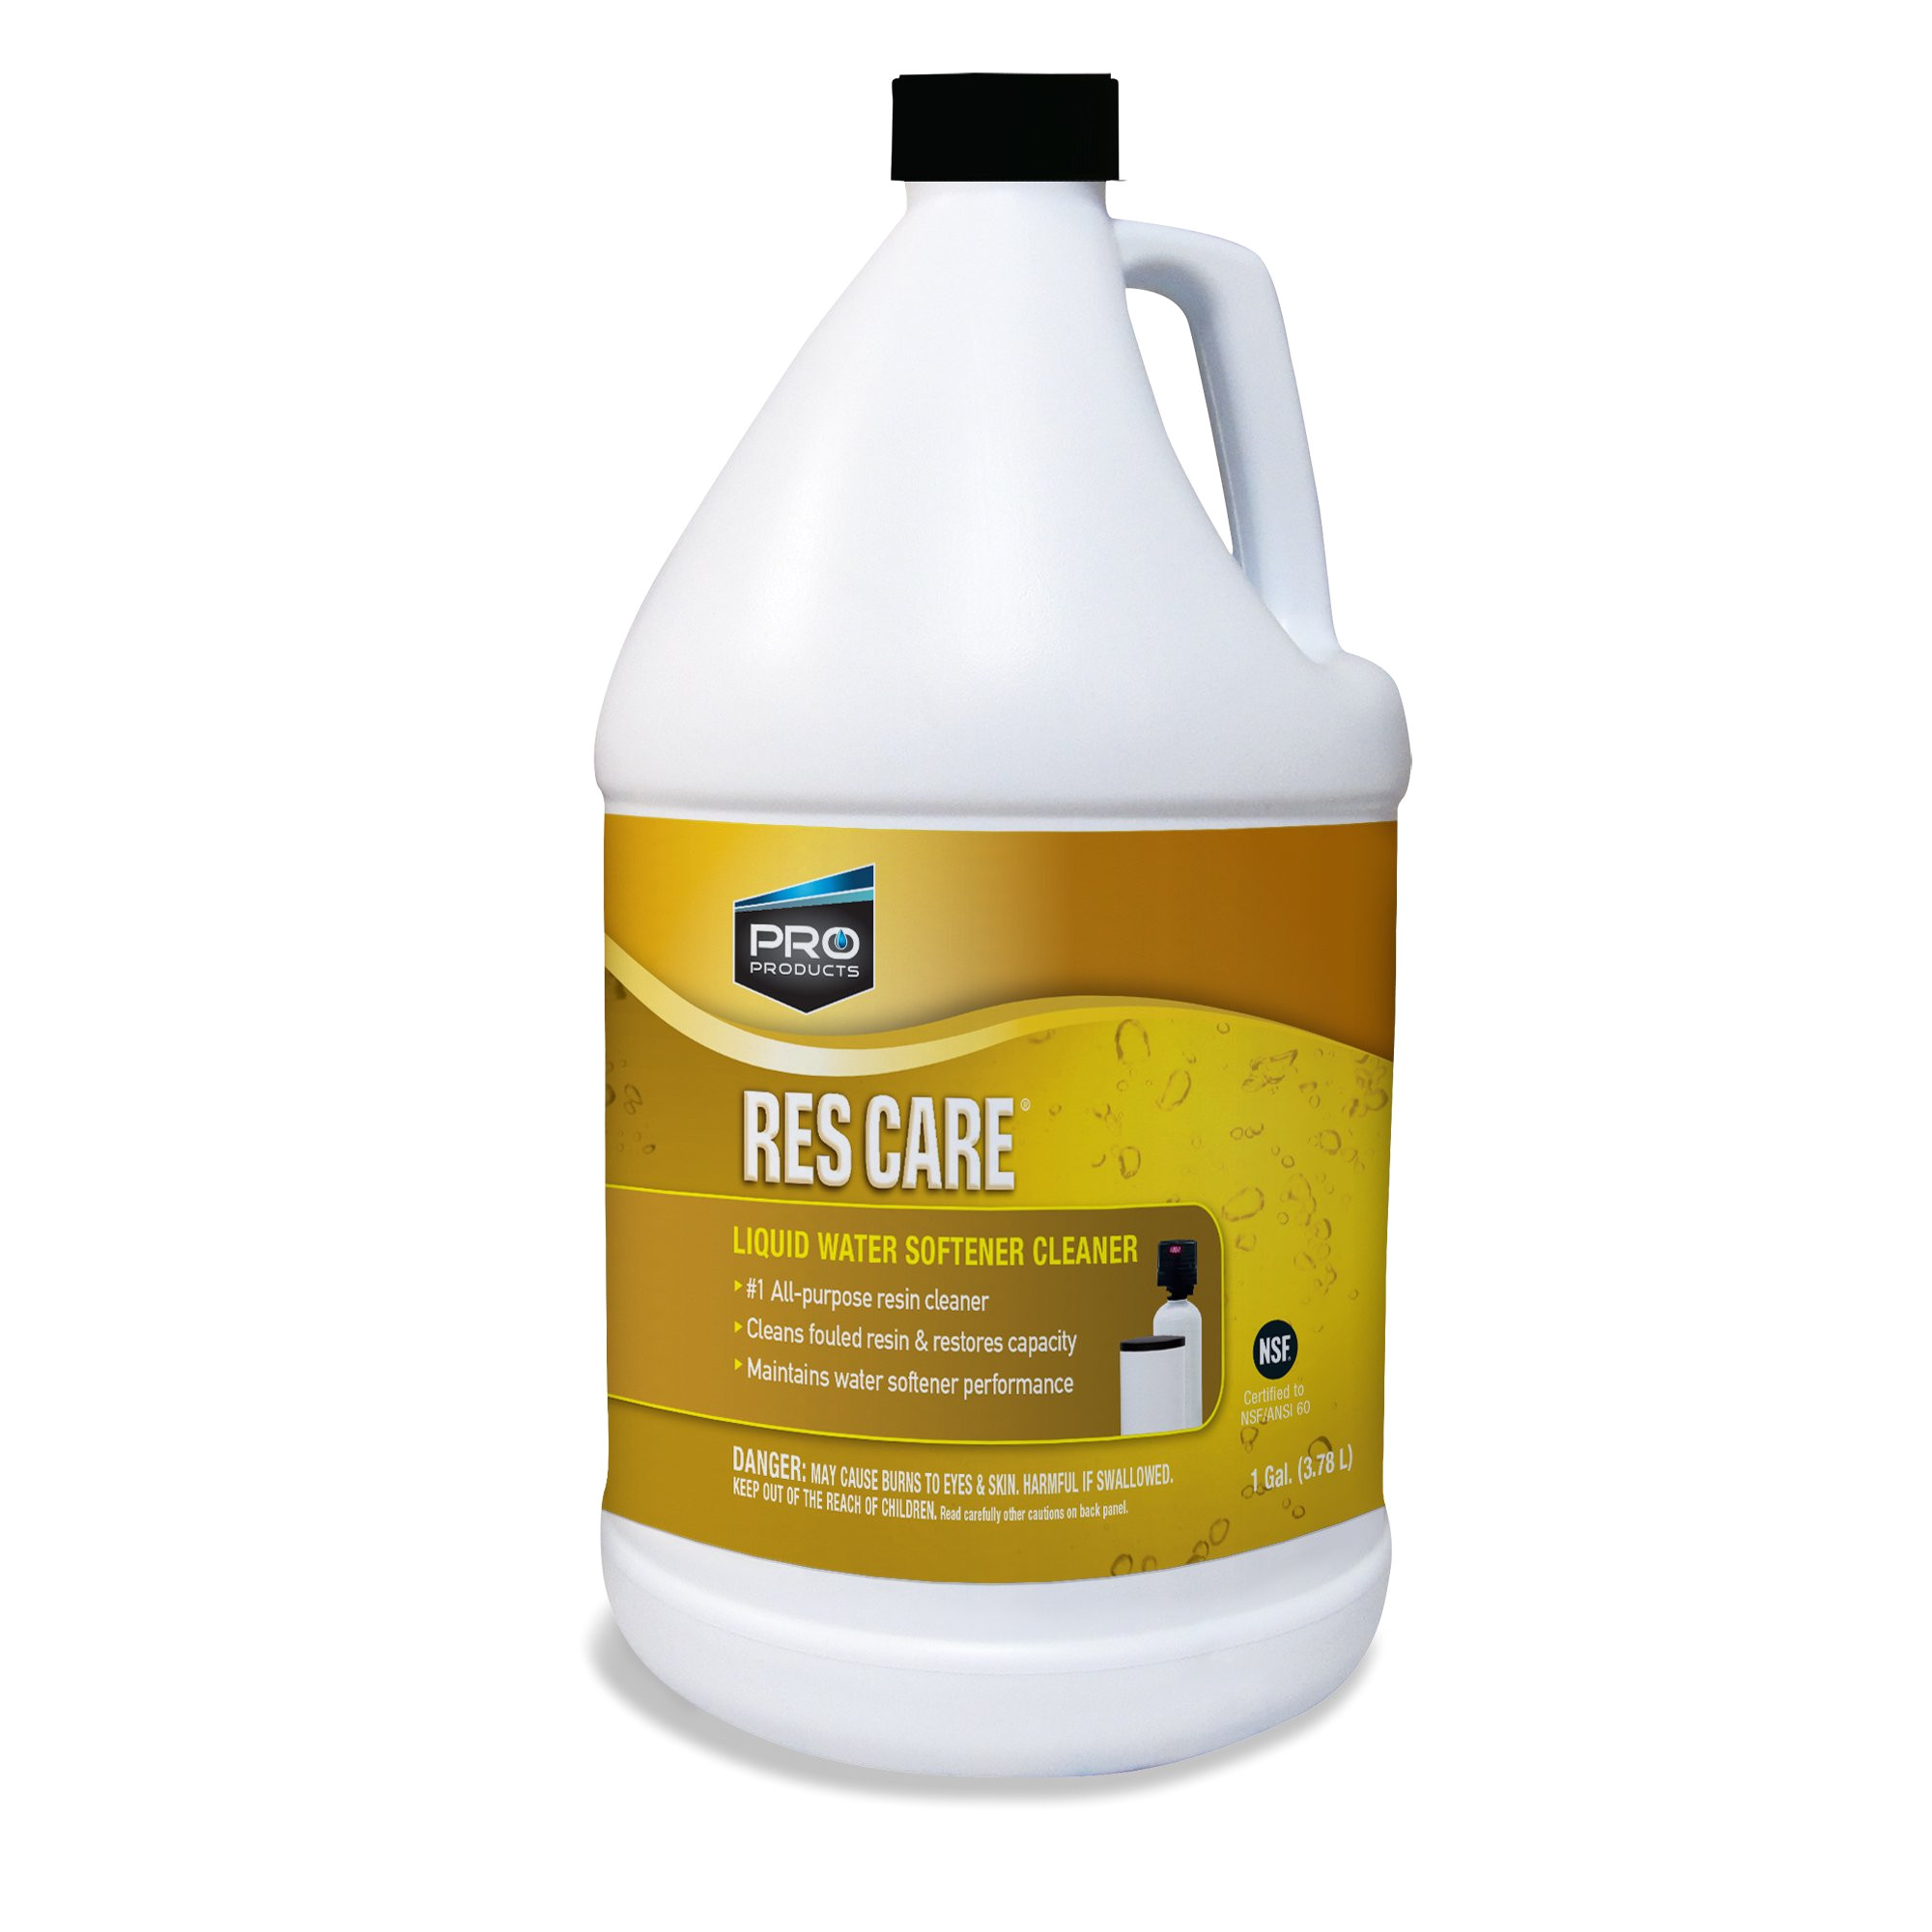 rescare rk41n all purpose water softener cleaner liquid refill 1 gallon product image